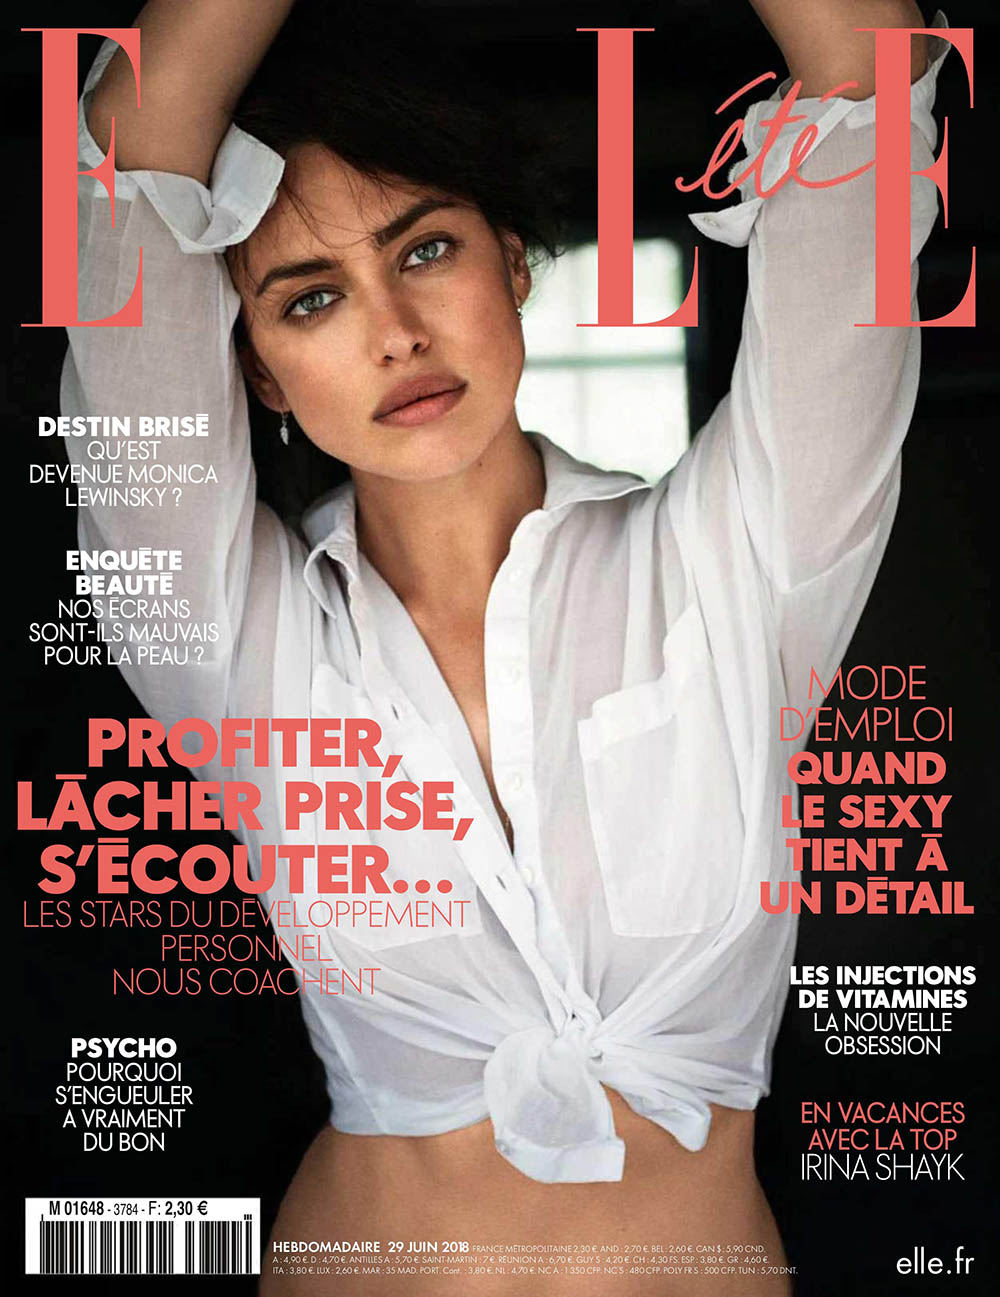 Irina Shayk covers Elle France June 29th, 2018 by Jan Welters